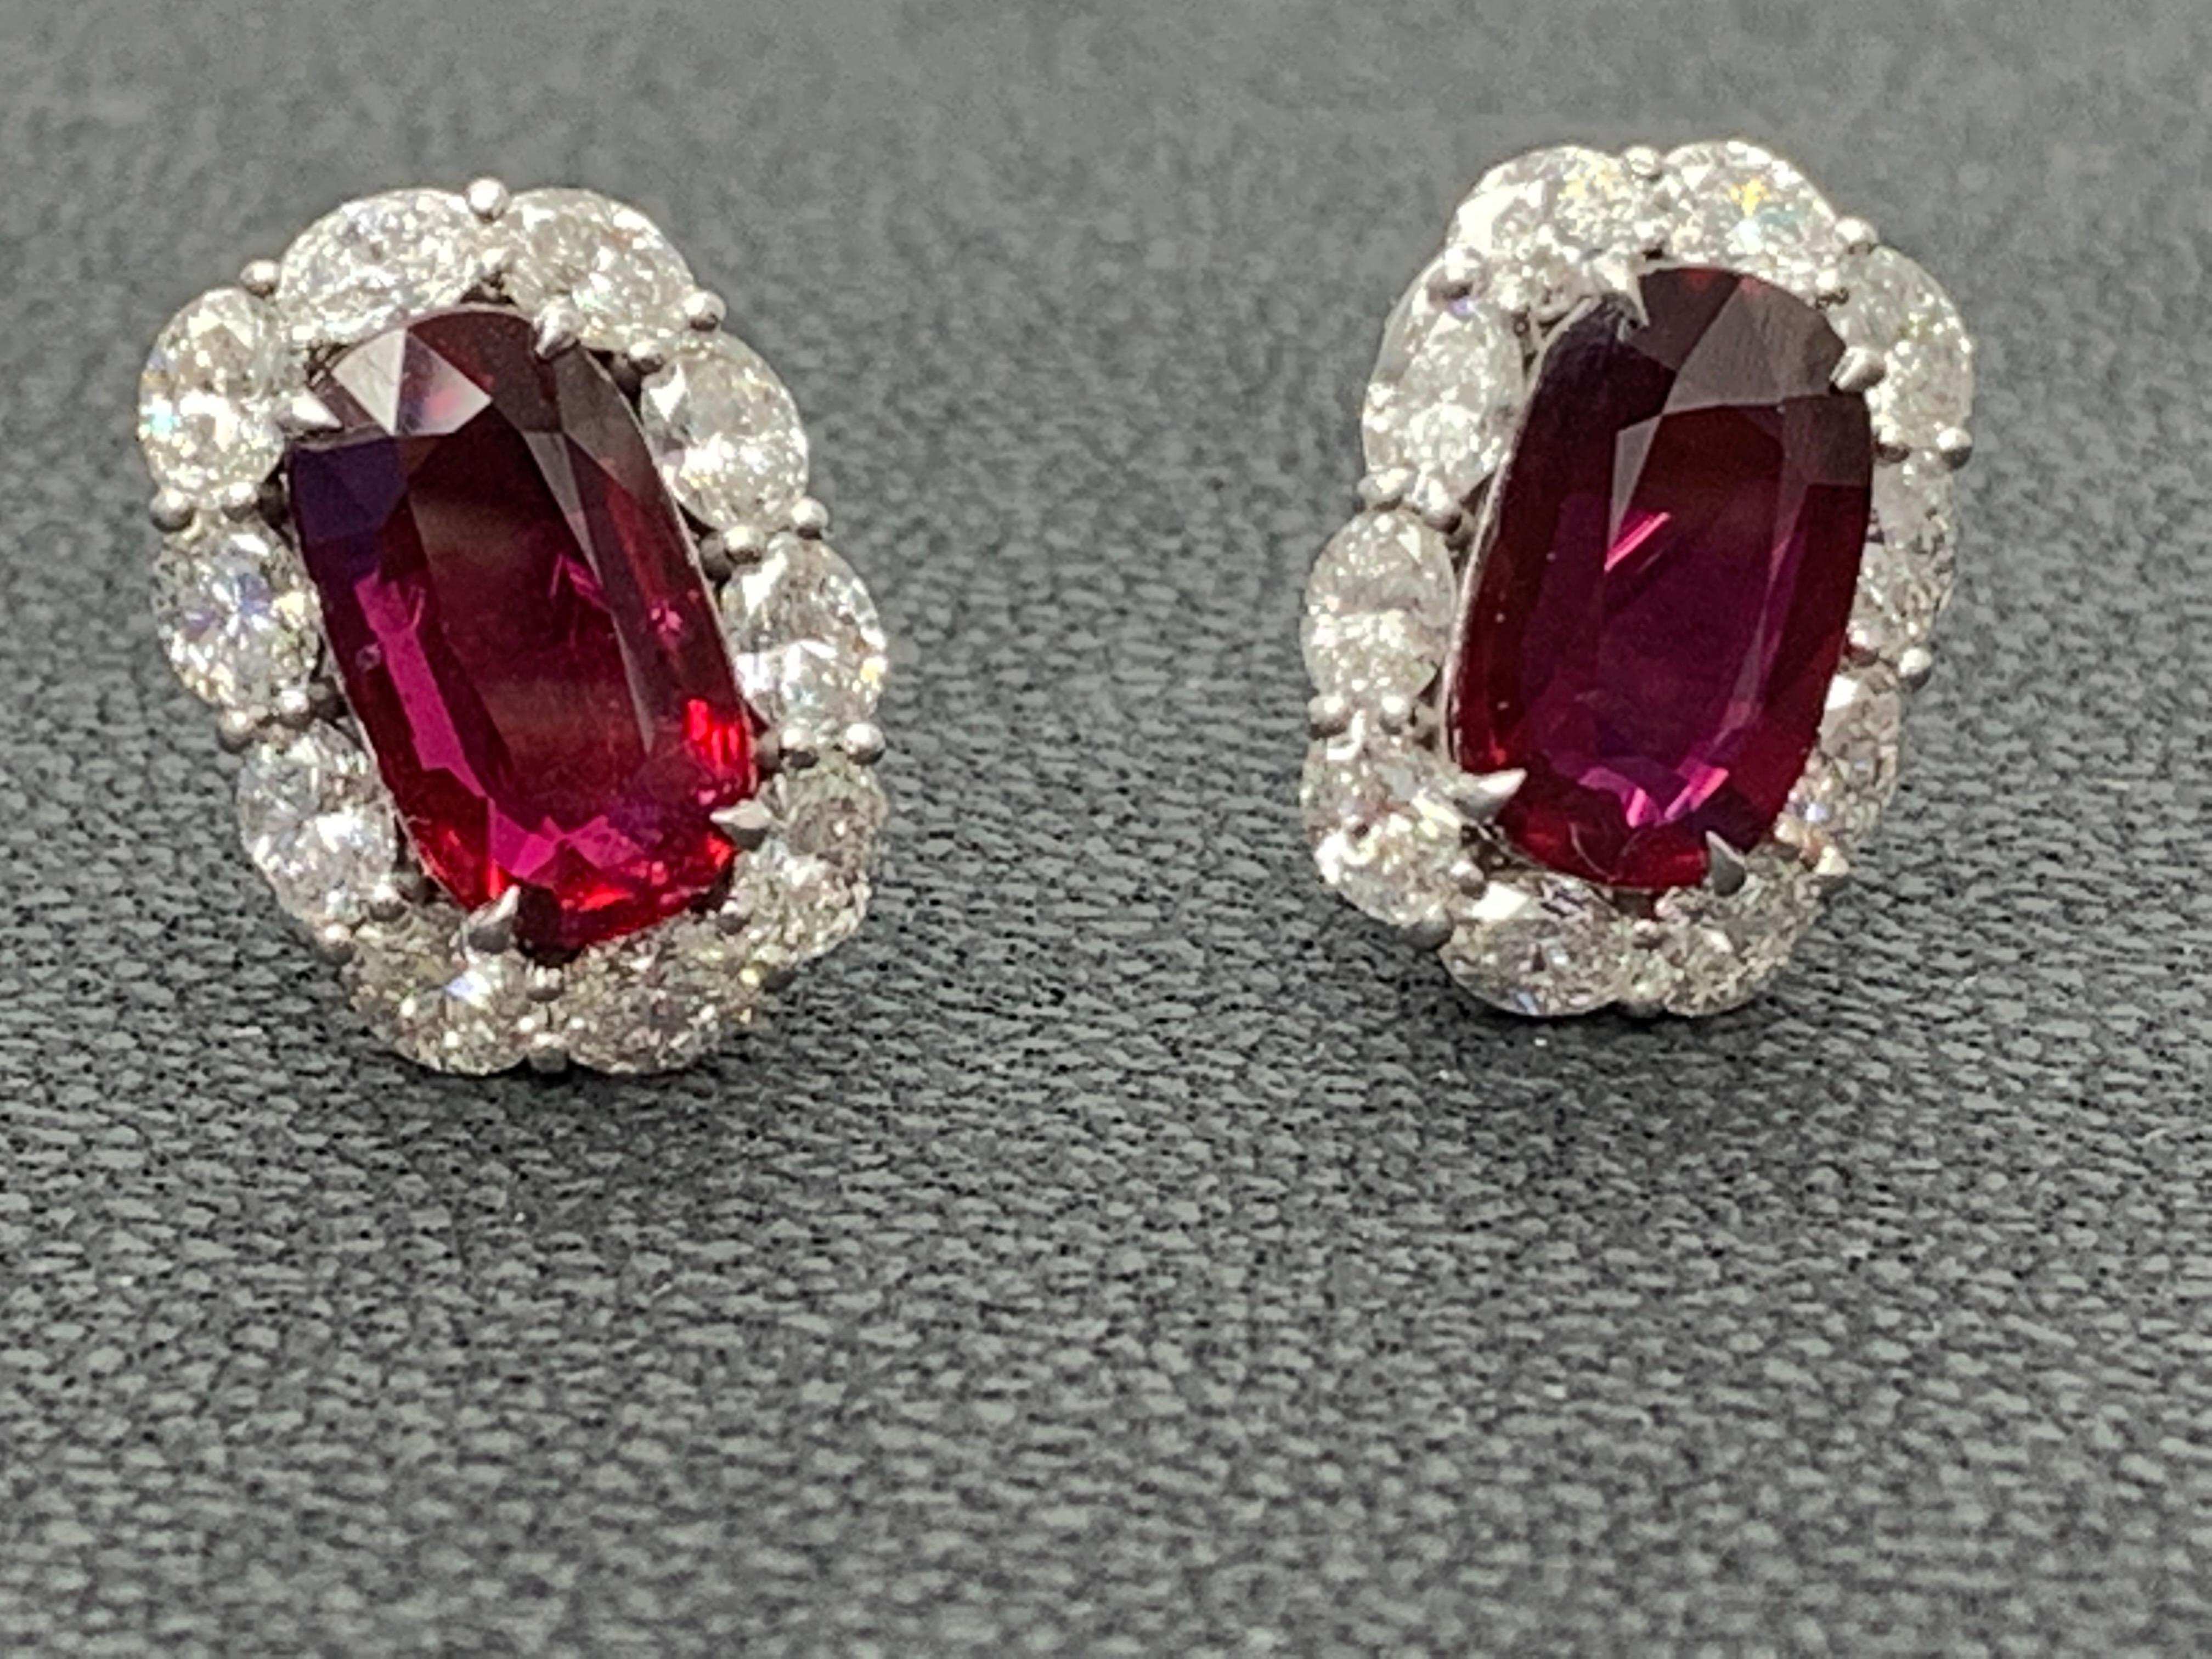 CERTIFIED 6.15 Carat Cushion Cut Ruby and Diamond Halo Earring in 18K White Gold For Sale 7